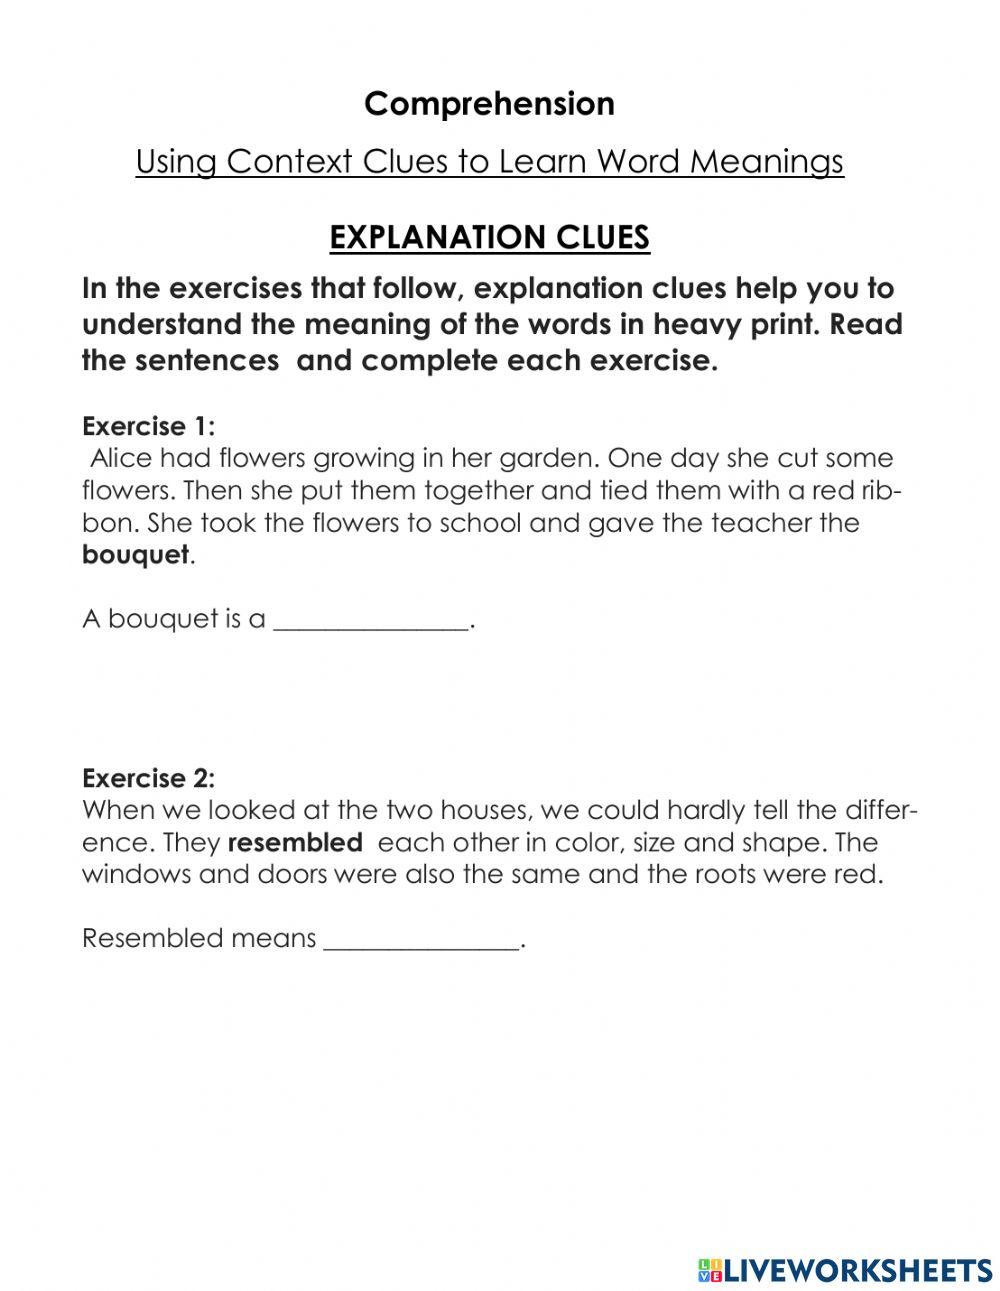 Context Clues-Example and Explanation Clues